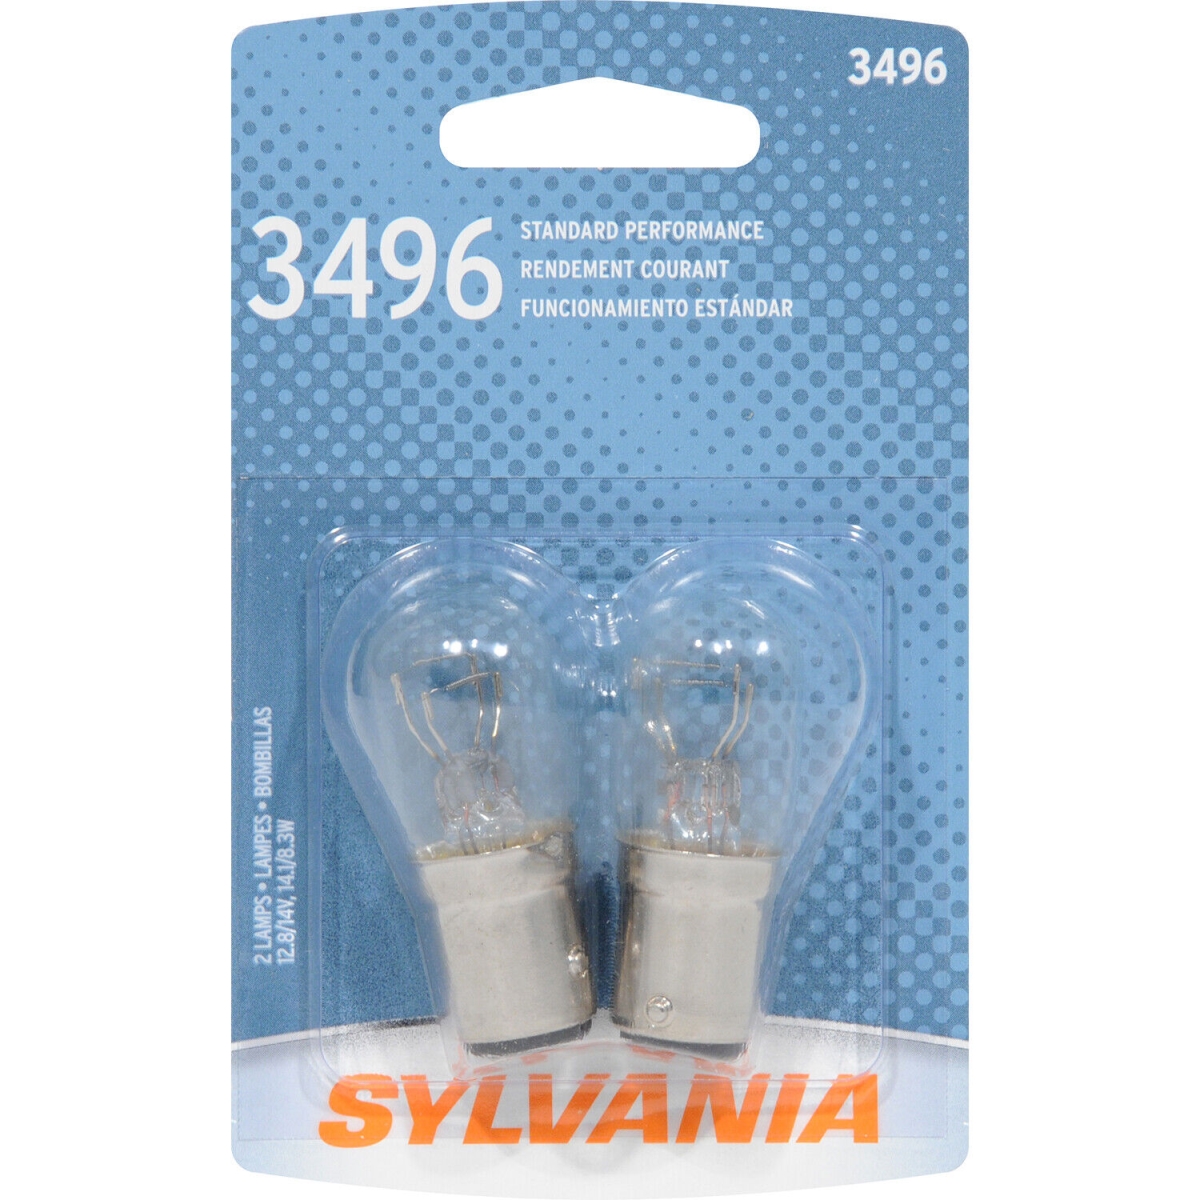 Picture of Sylvania 3496BP2 Basic Miniature Light Bulb - Pack of 2